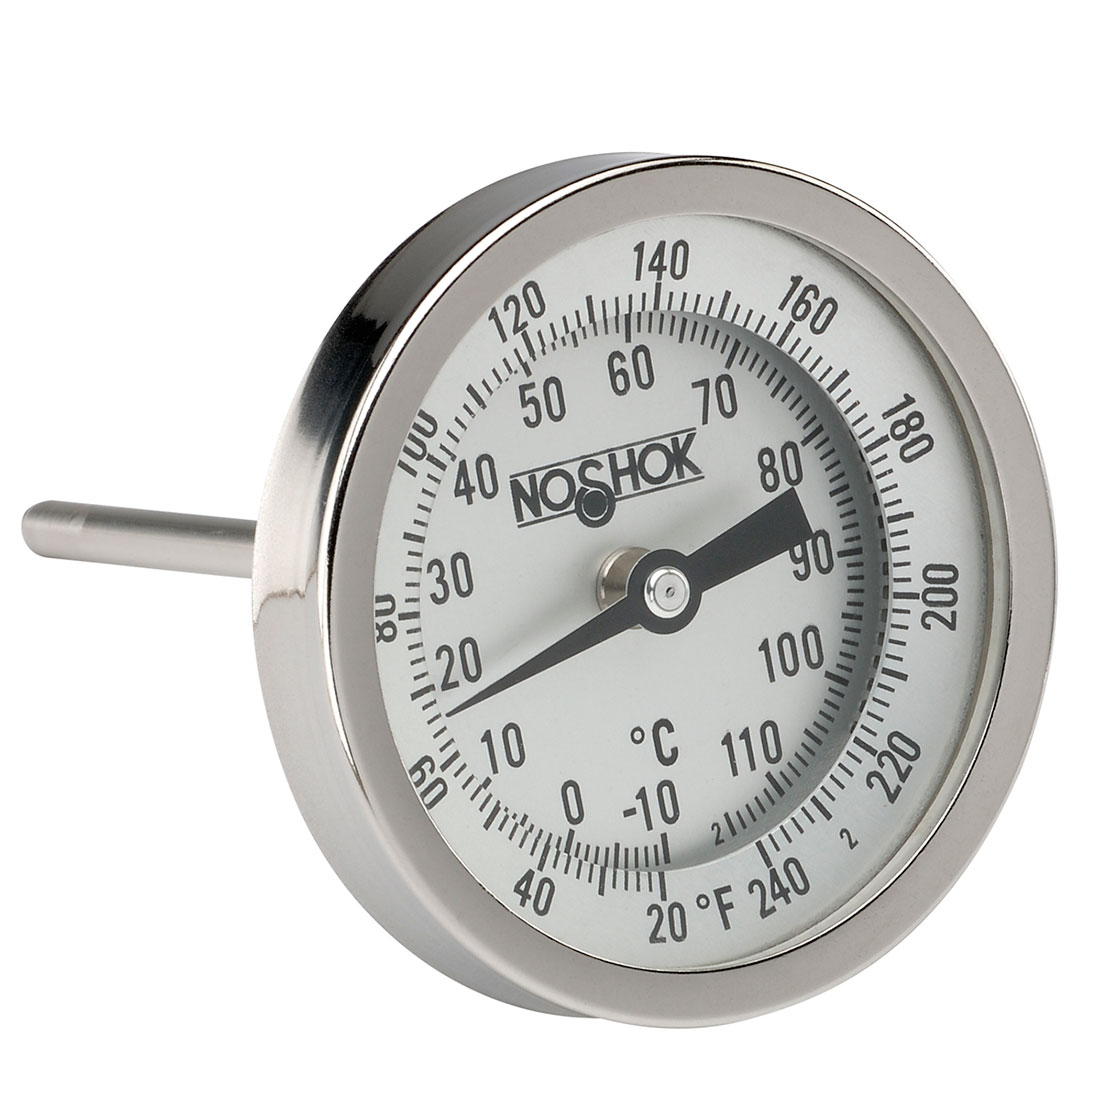 Adjustable Industrial Bimetal Thermometer 5 Face x 2-1/2 Stem, 0-250 w/Calibration Dial